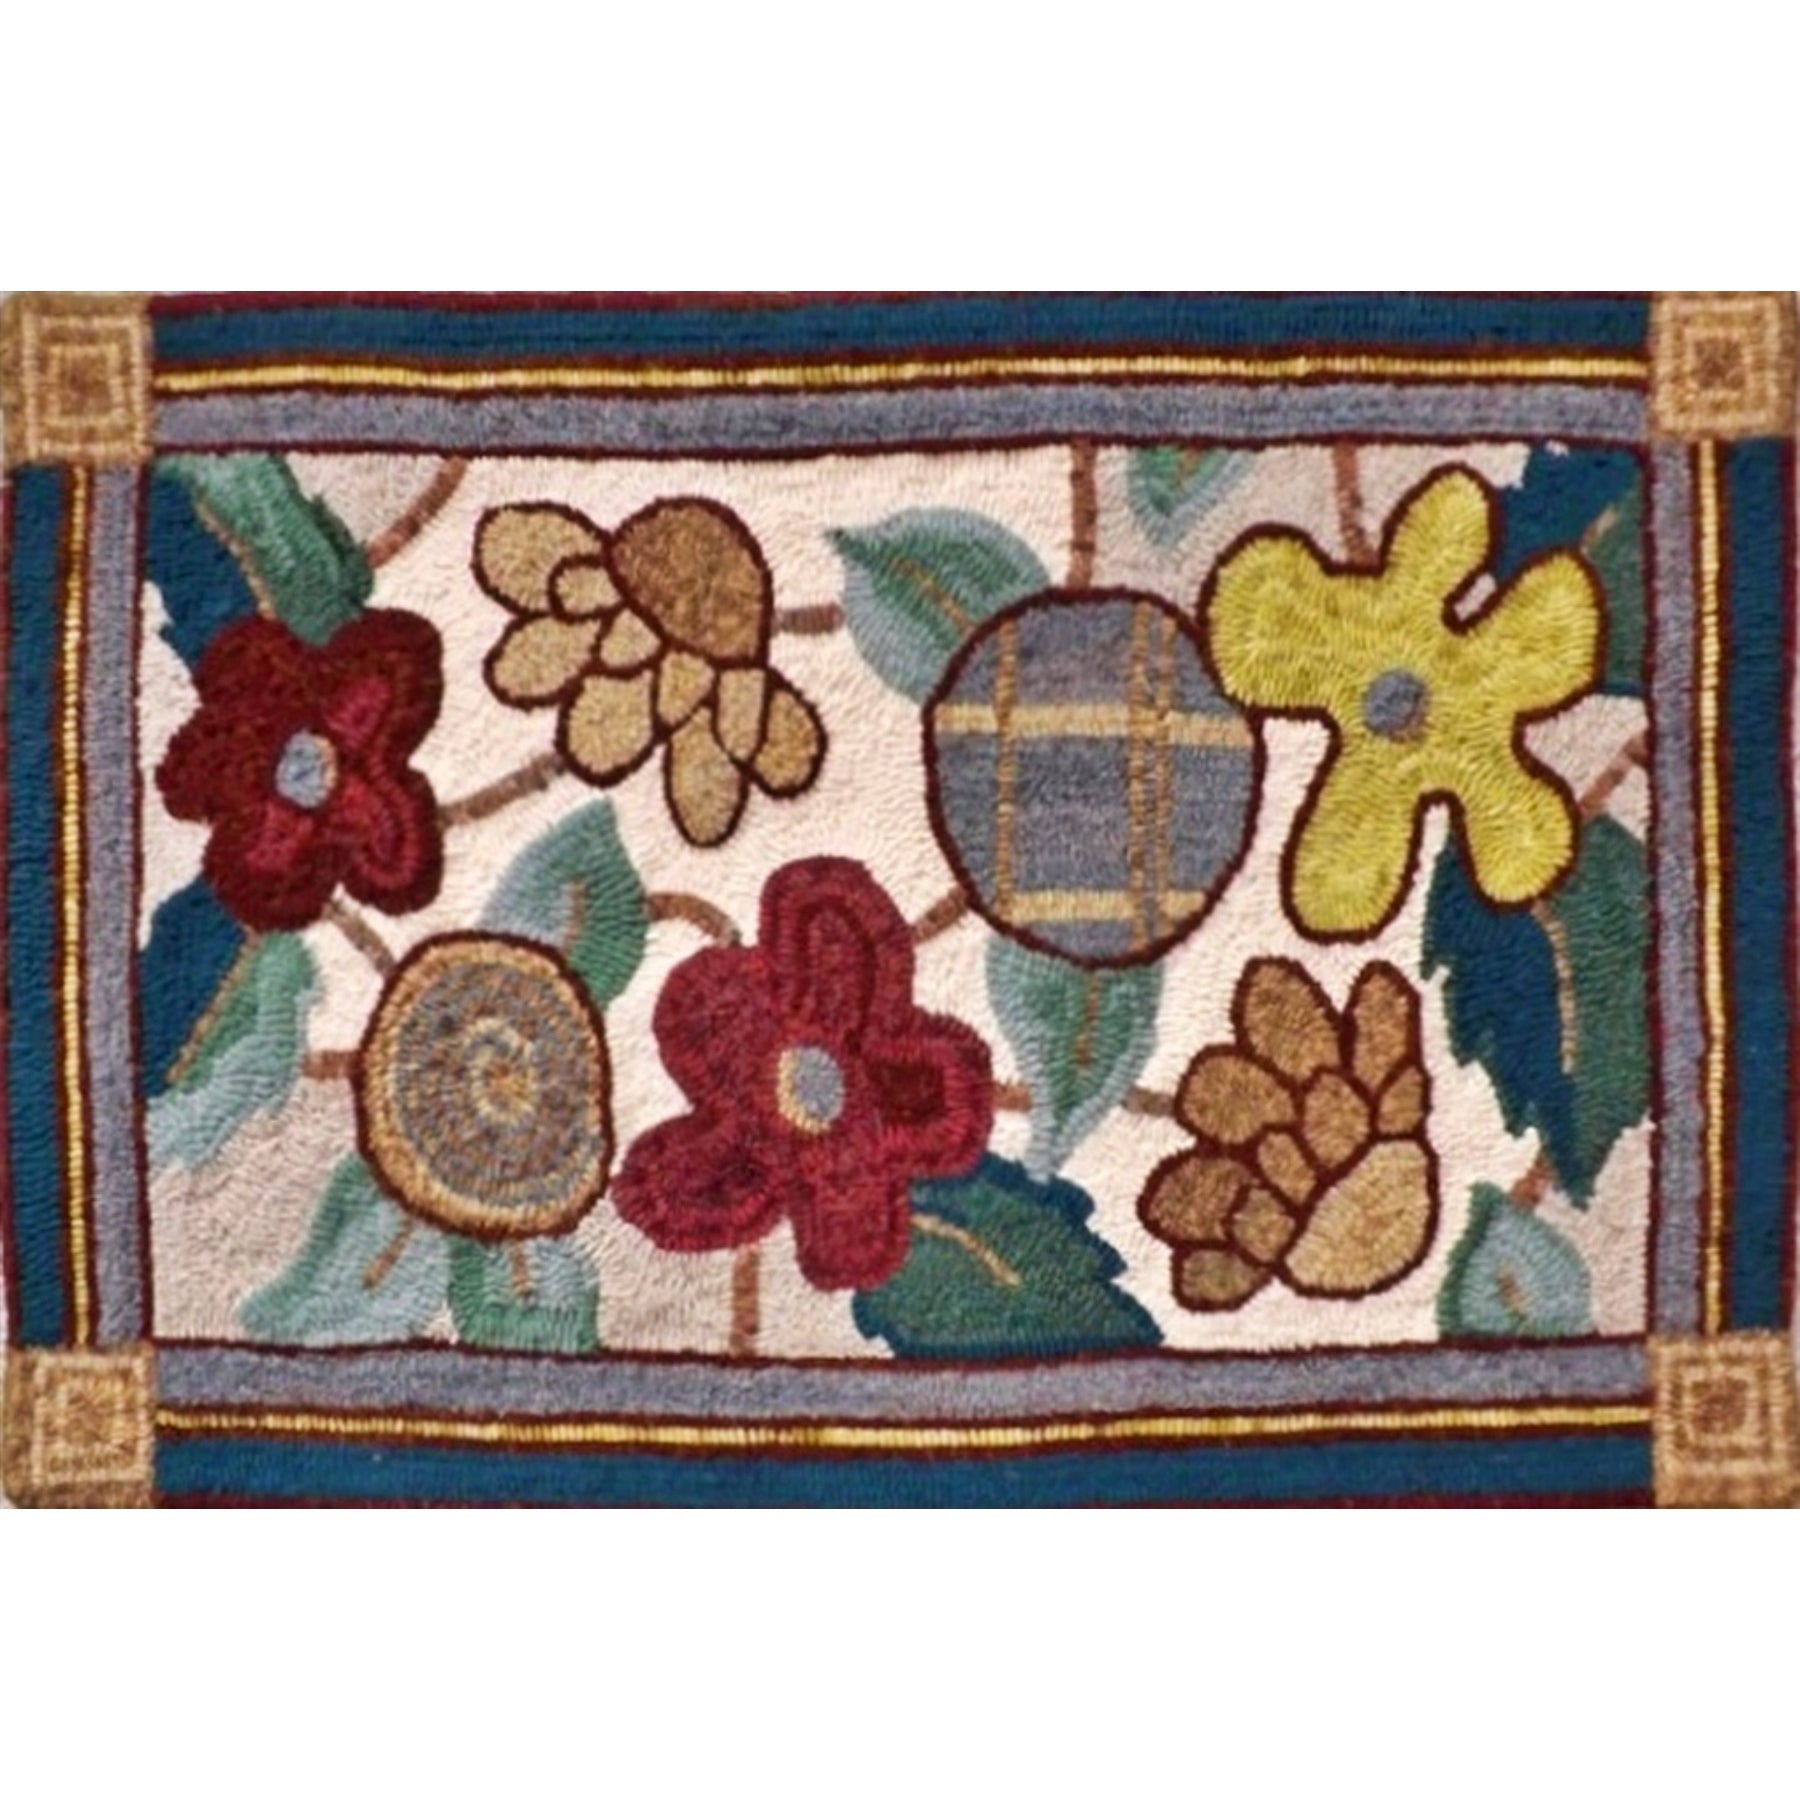 Stephanie's Garden, rug hooked by Jane McGown Flynn